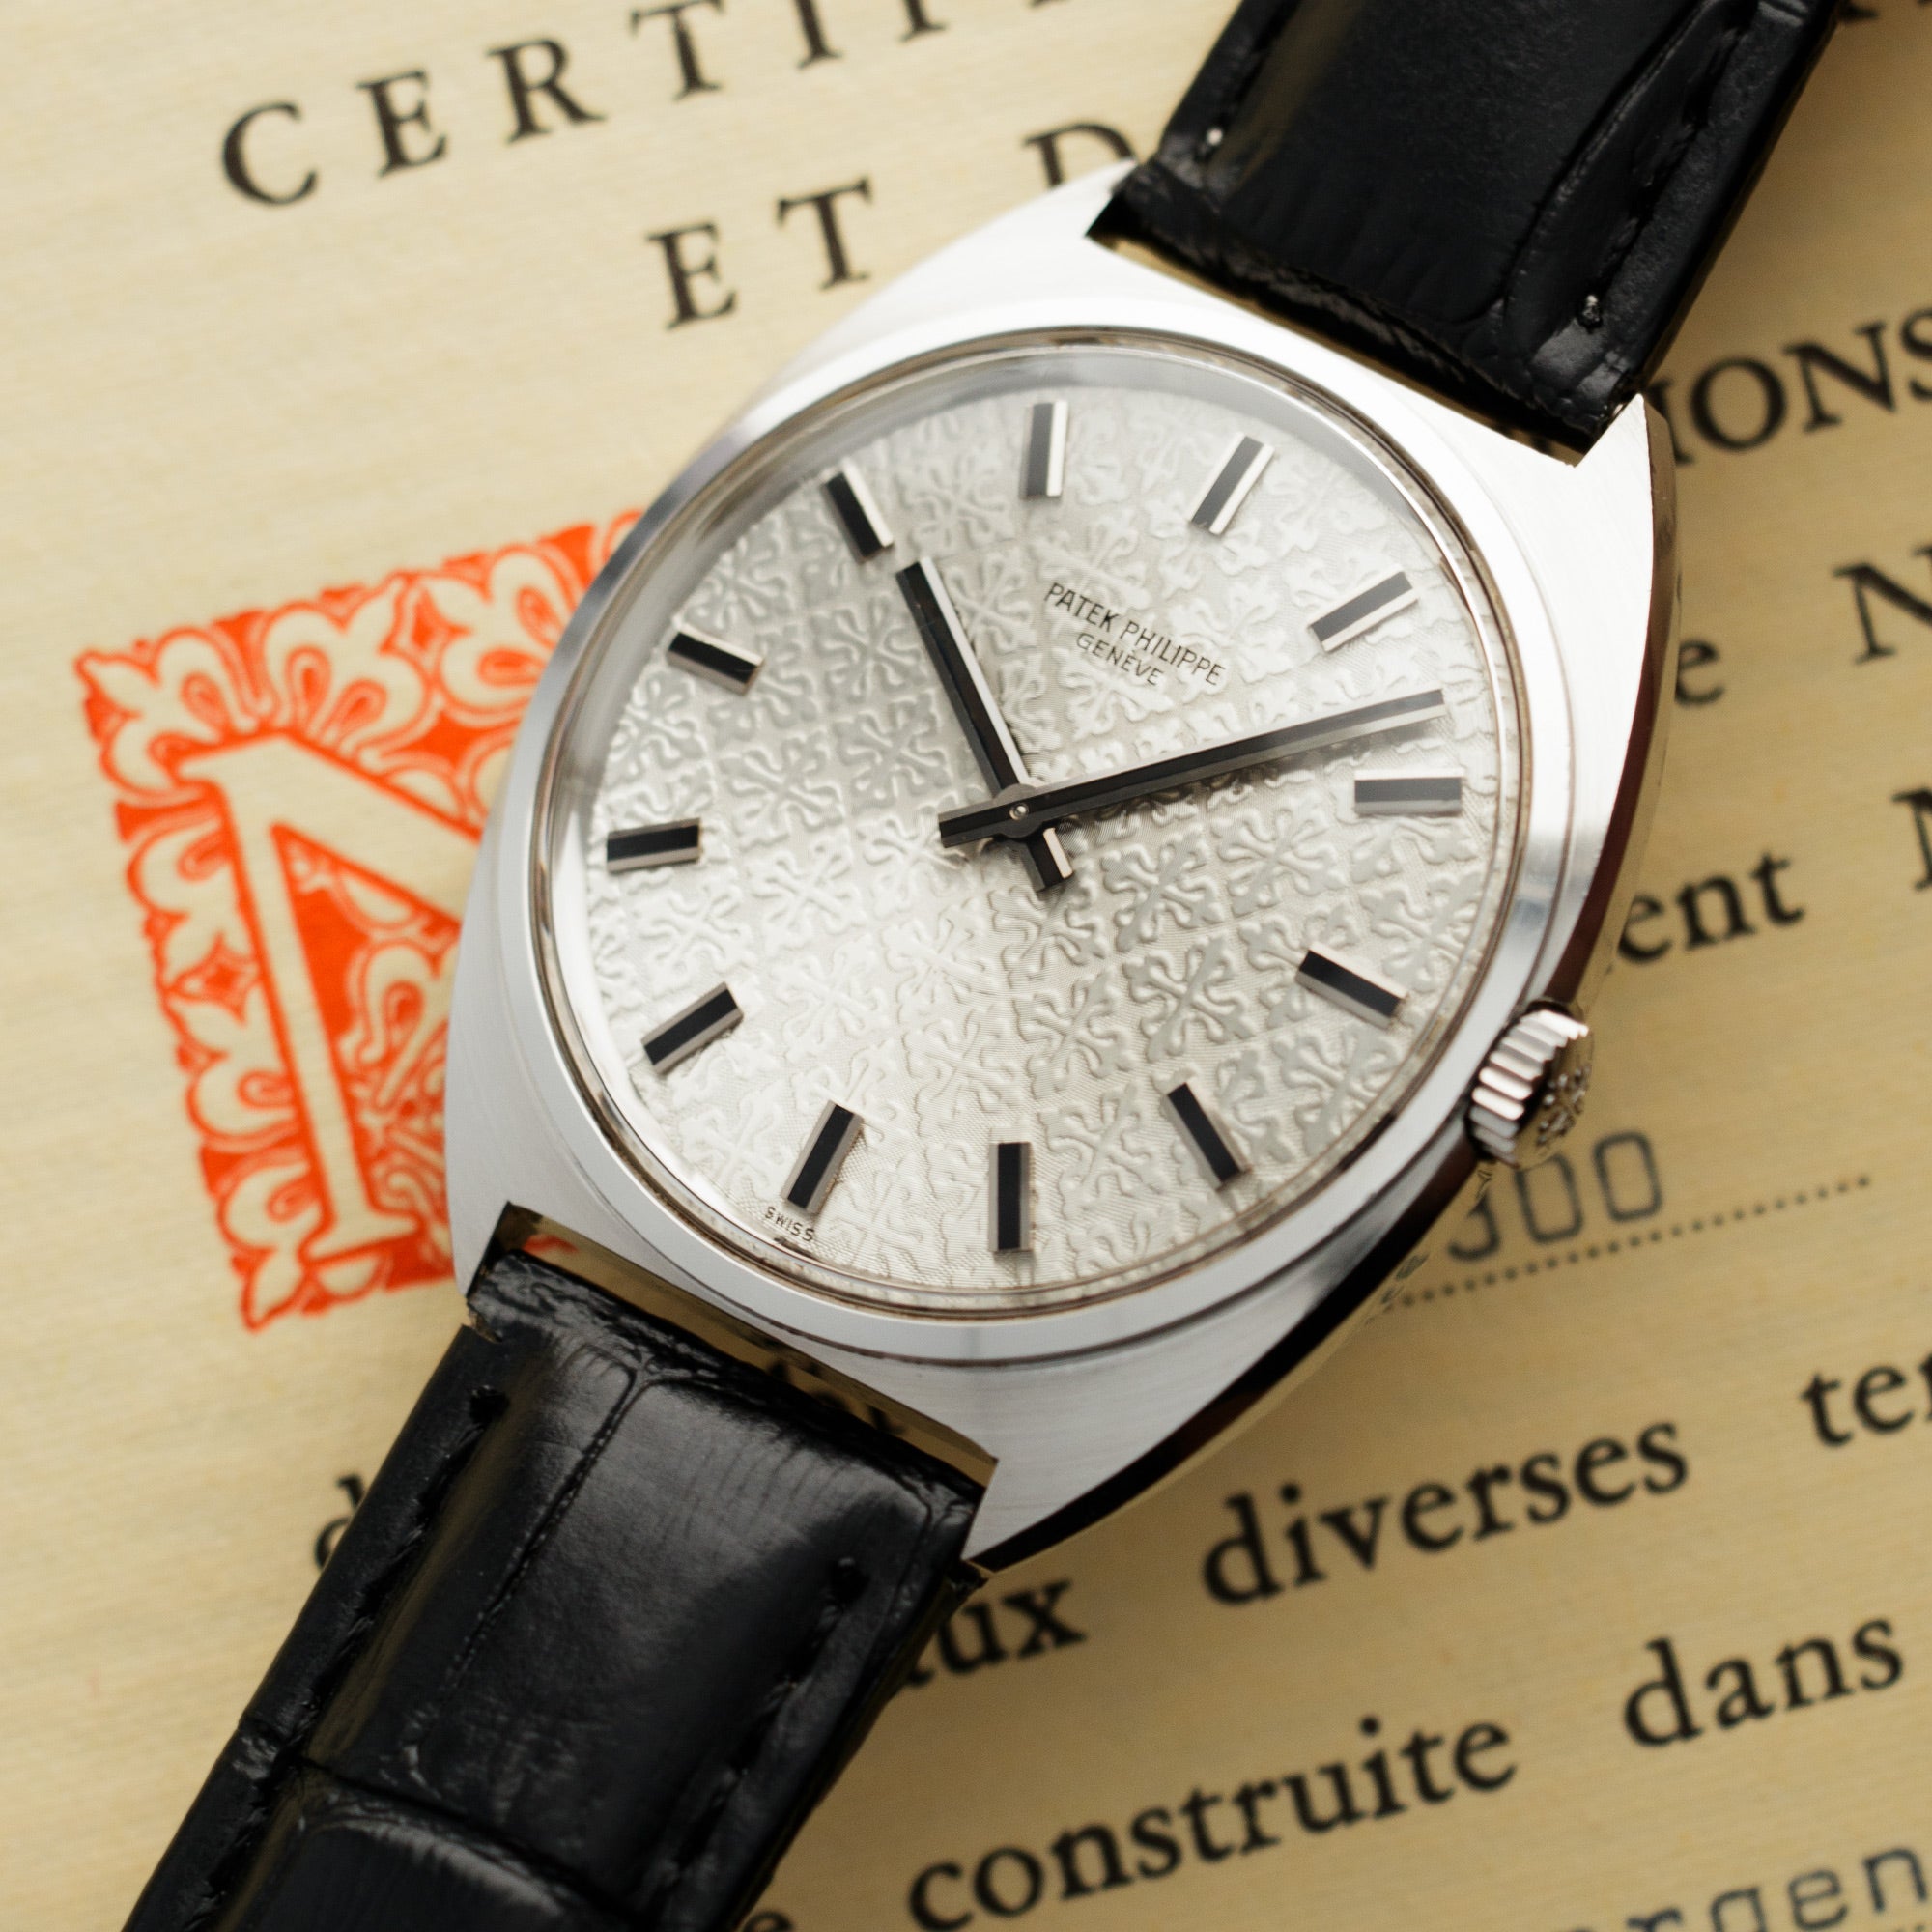 Patek Philippe - Patek Philippe Steel Watch Ref. 3574 with Box and Papers - The Keystone Watches